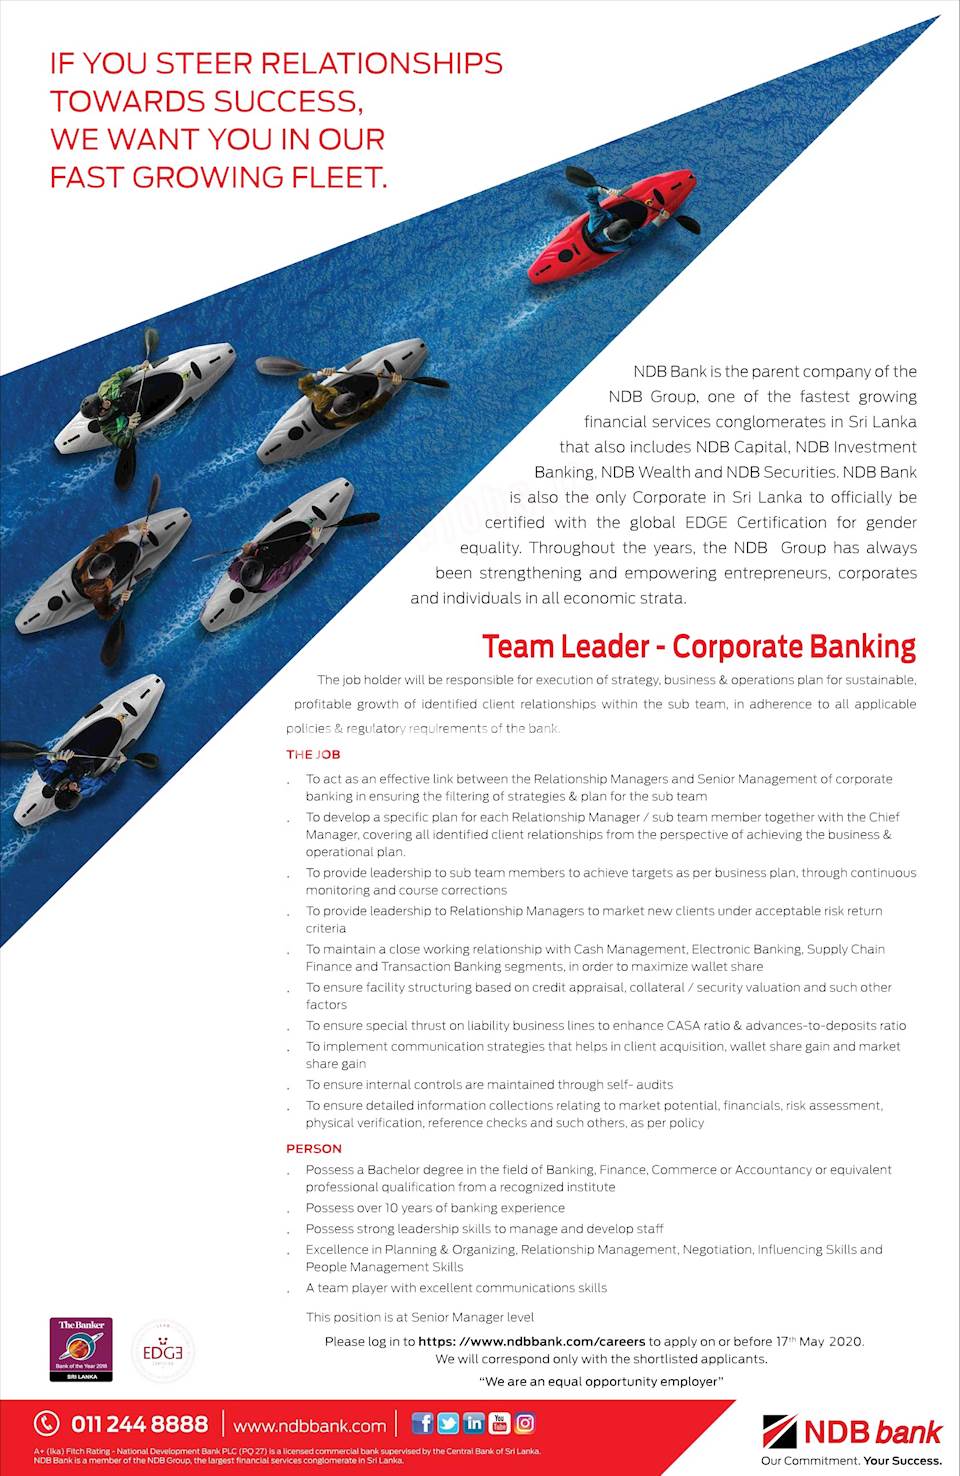 Team Leader - Corporate Banking